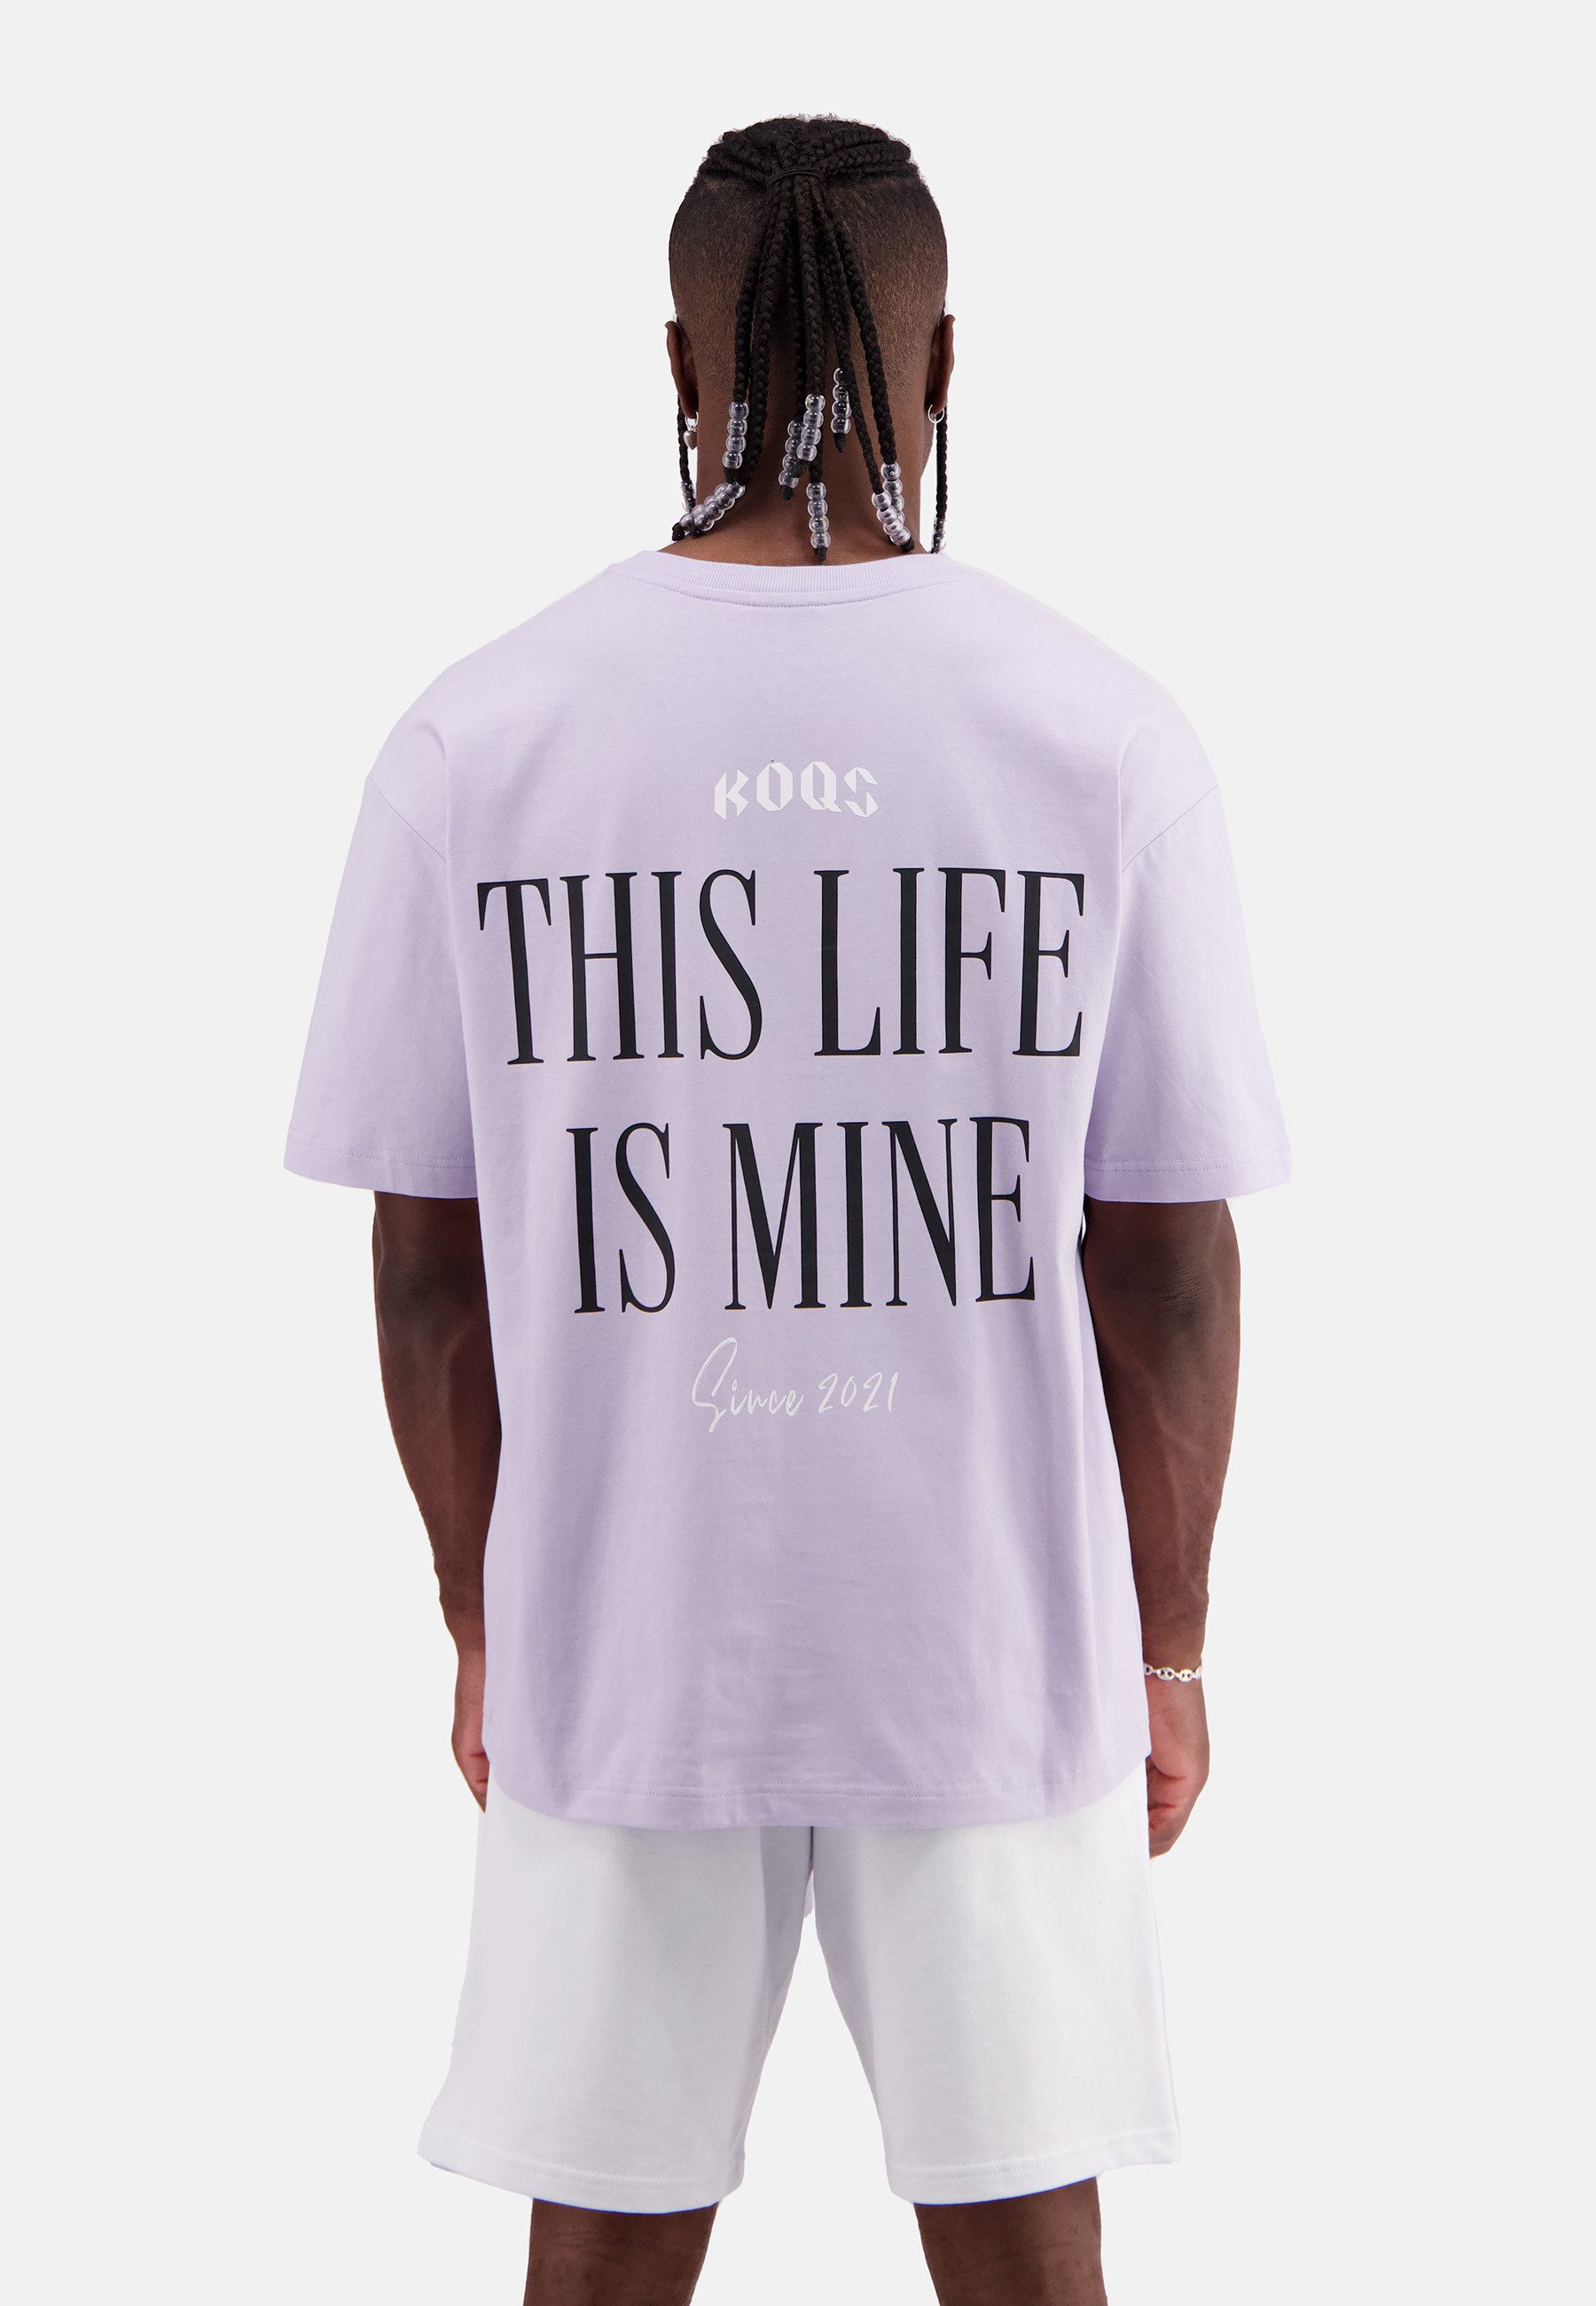 KOQS T-Shirt "This Life is mine"